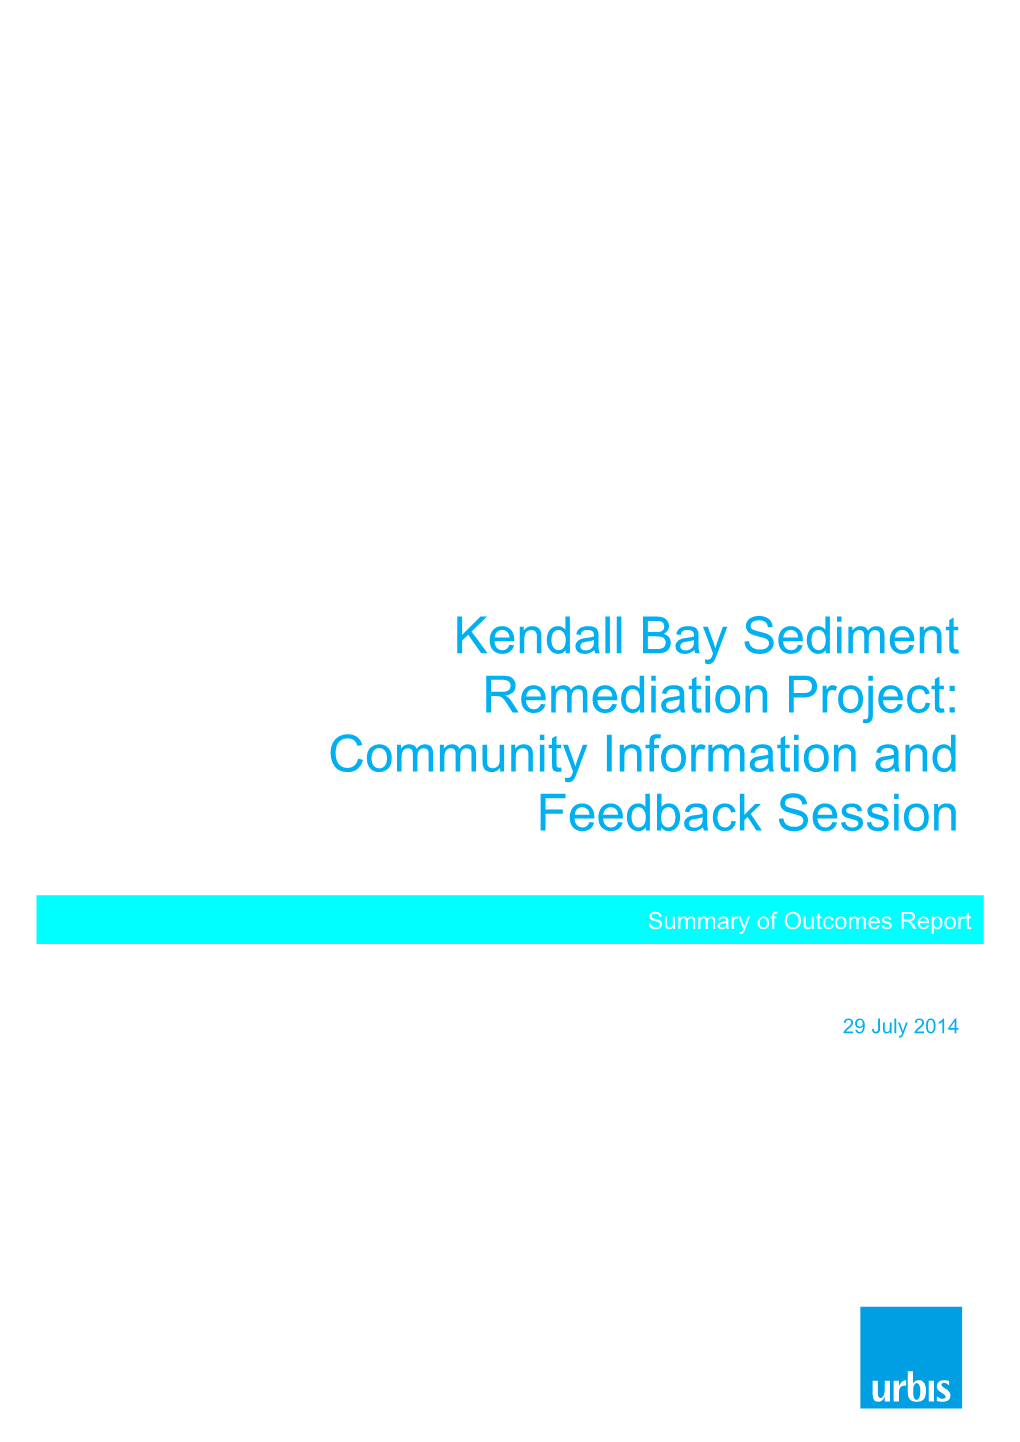 Kendall Bay Sediment Remediation Project: Community Information and Feedback Session